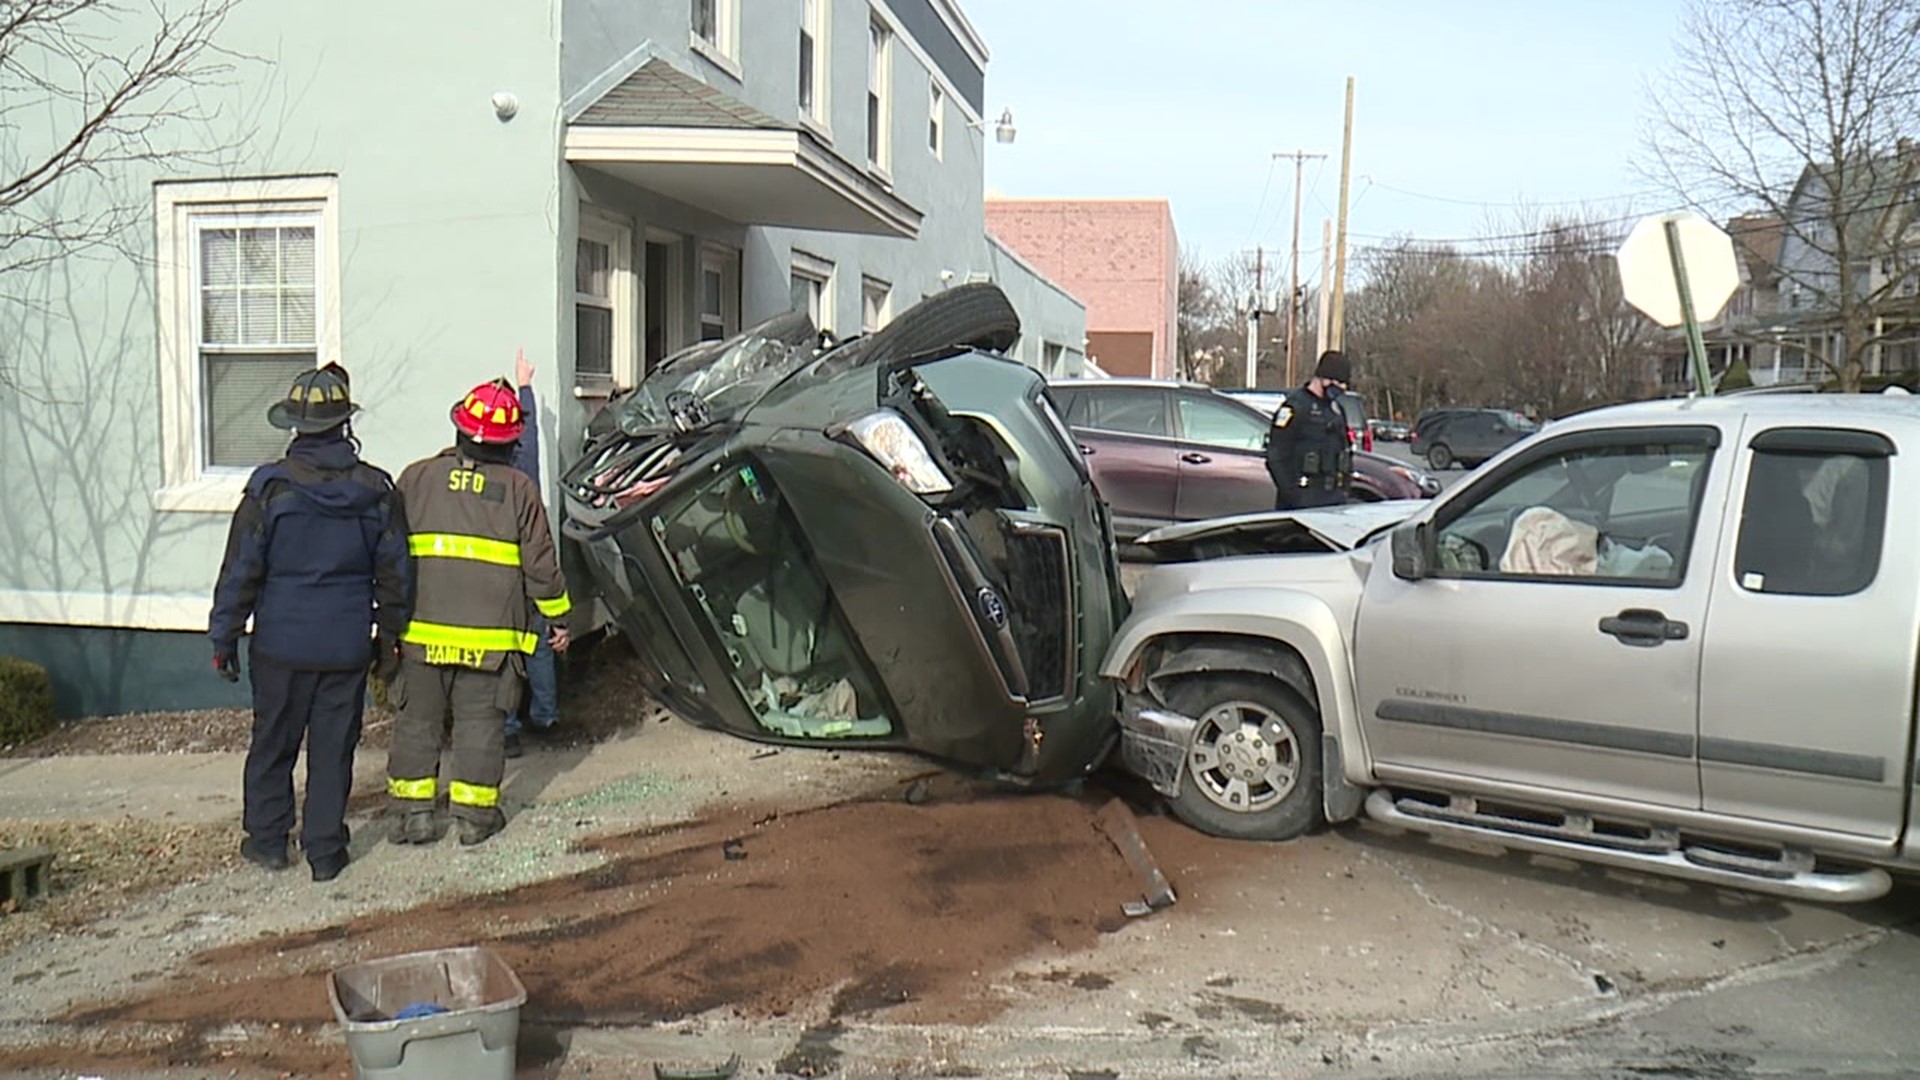 A pickup truck and car collided at an intersection in Scranton; both vehicles hit Industrial Electronics.